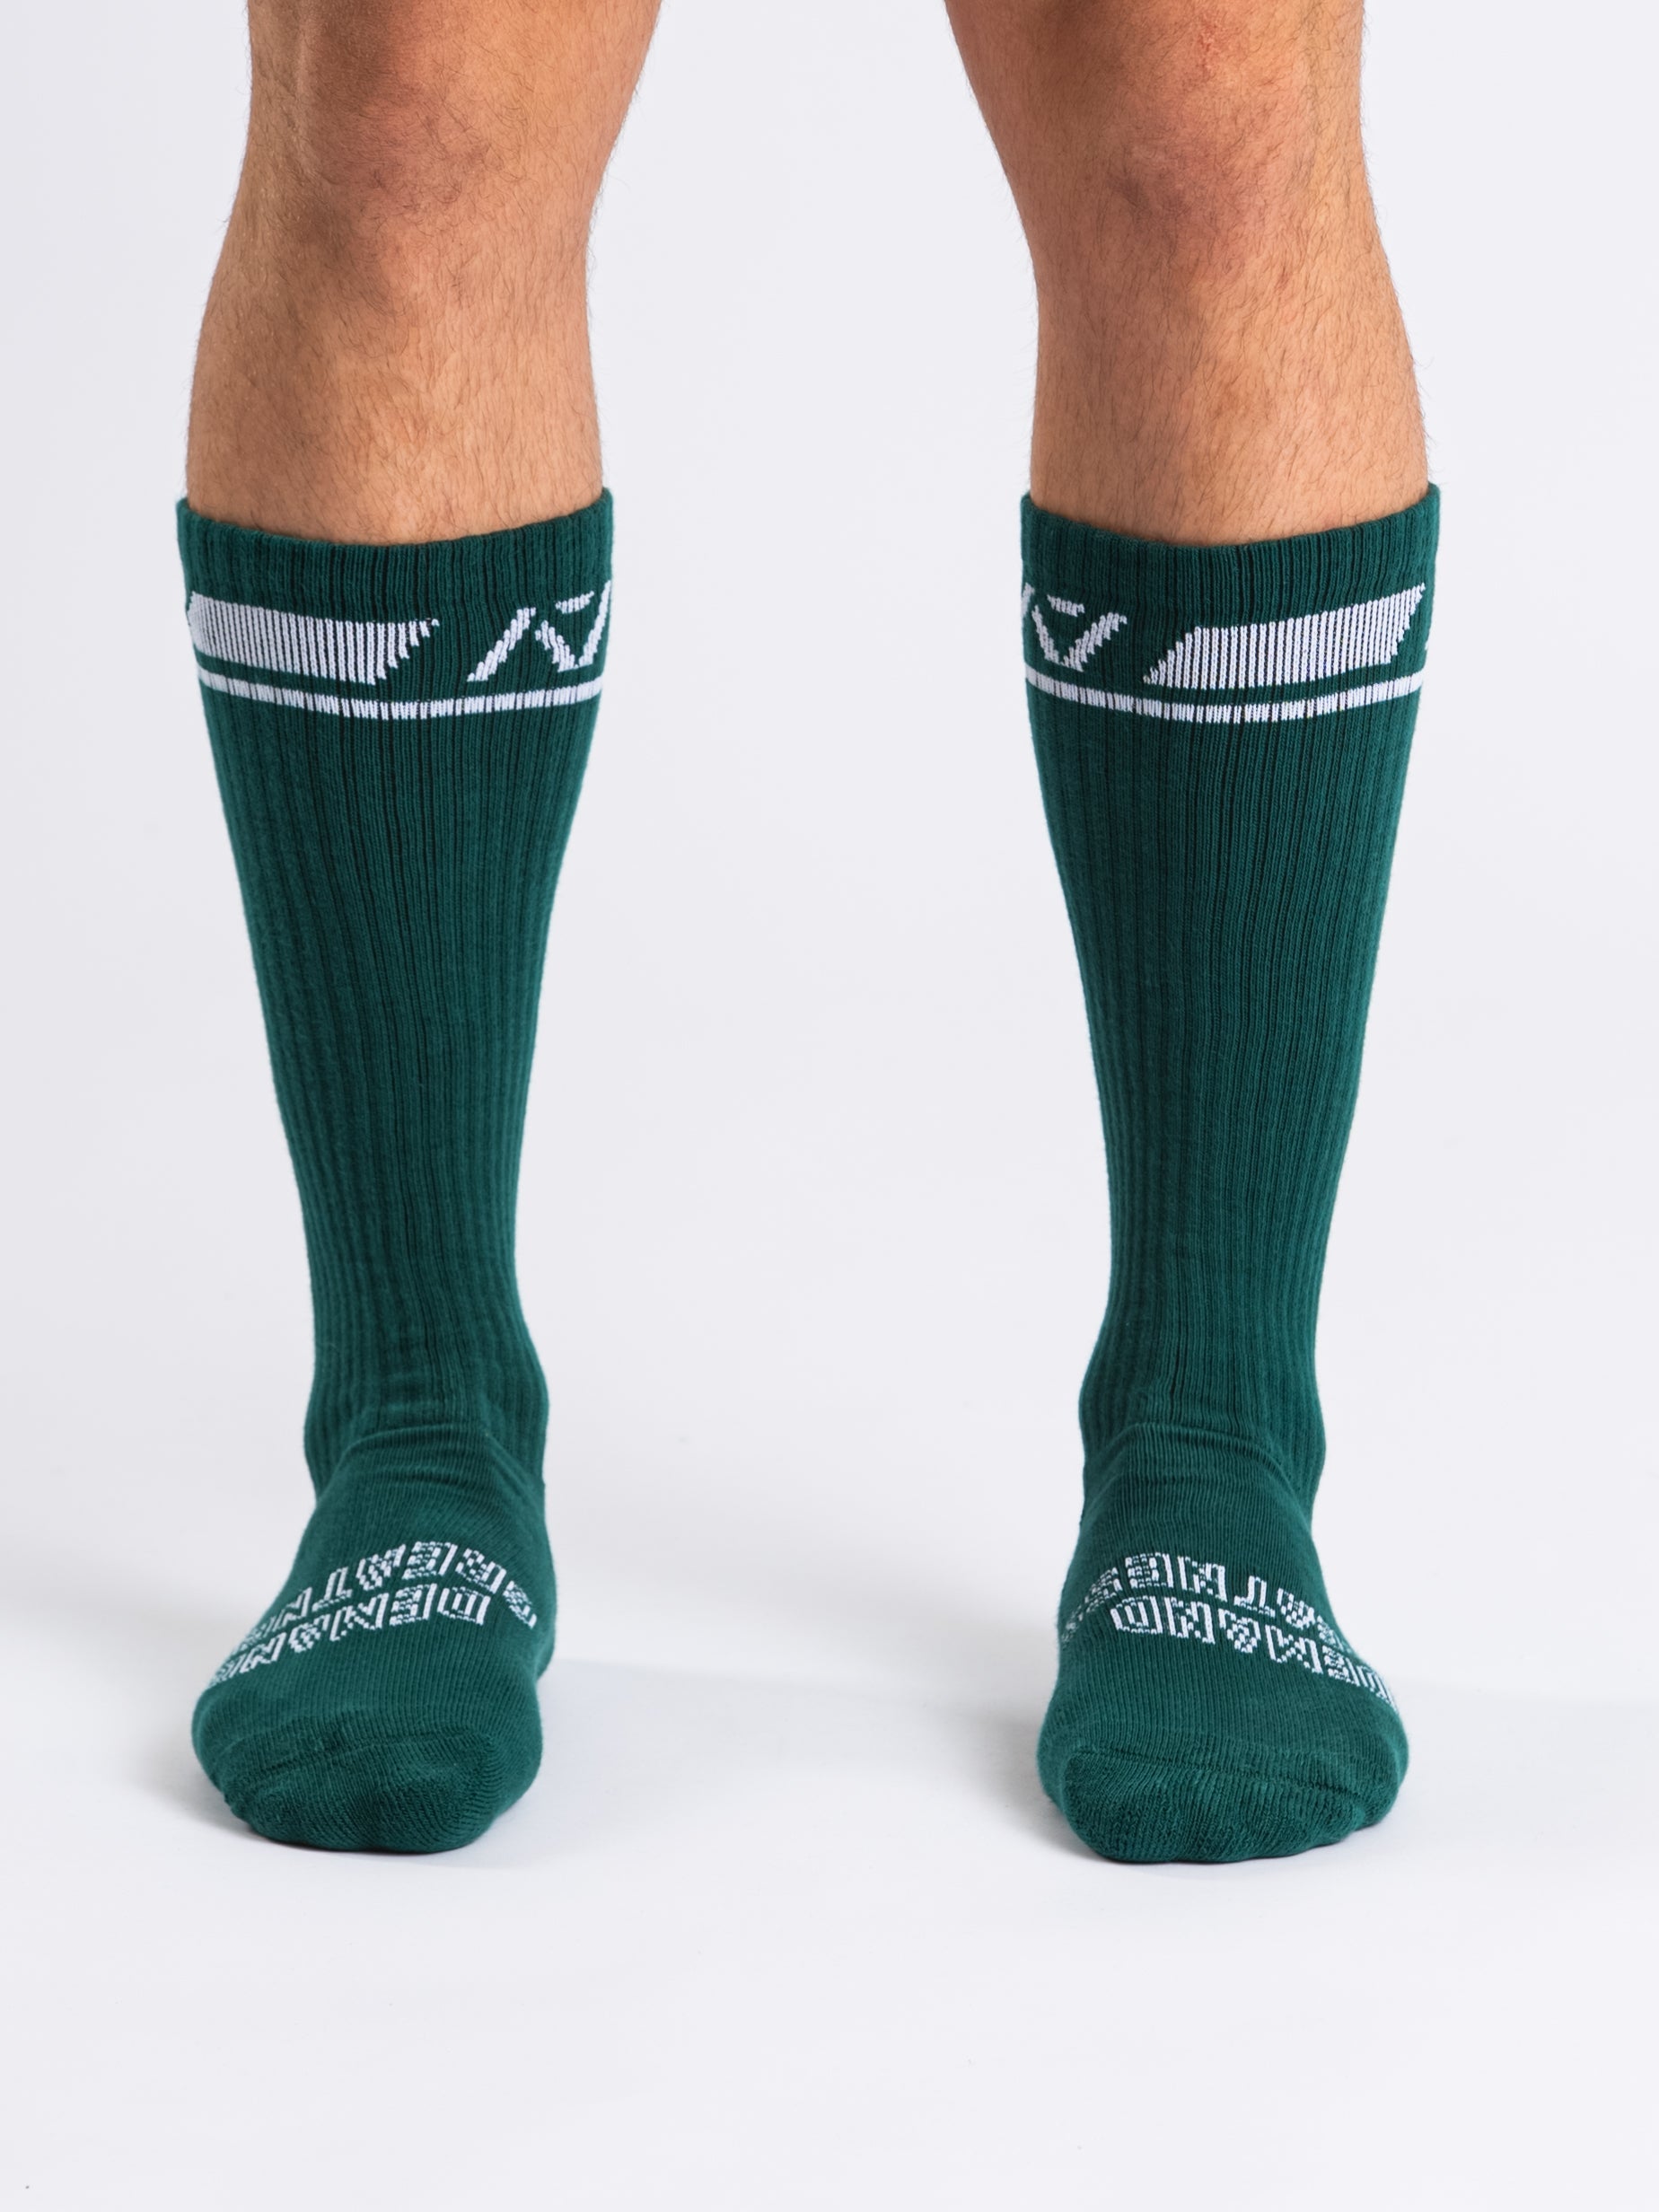 A7 Emerald Forás deadlift socks are designed specifically for pulls and keep your shins protected from scrapes. A7 deadlift socks are a perfect pair to wear in training or powerlifting competition. The A7 IPF Approved Kit includes Powerlifting Singlet, A7 Meet Shirt, A7 Zebra Wrist Wraps, A7 Deadlift Socks, Hourglass Knee Sleeves (Stiff Knee Sleeves and Rigor Mortis Knee Sleeves). All A7 Powerlifting Equipment shipping to UK, Norway, Switzerland and Iceland.